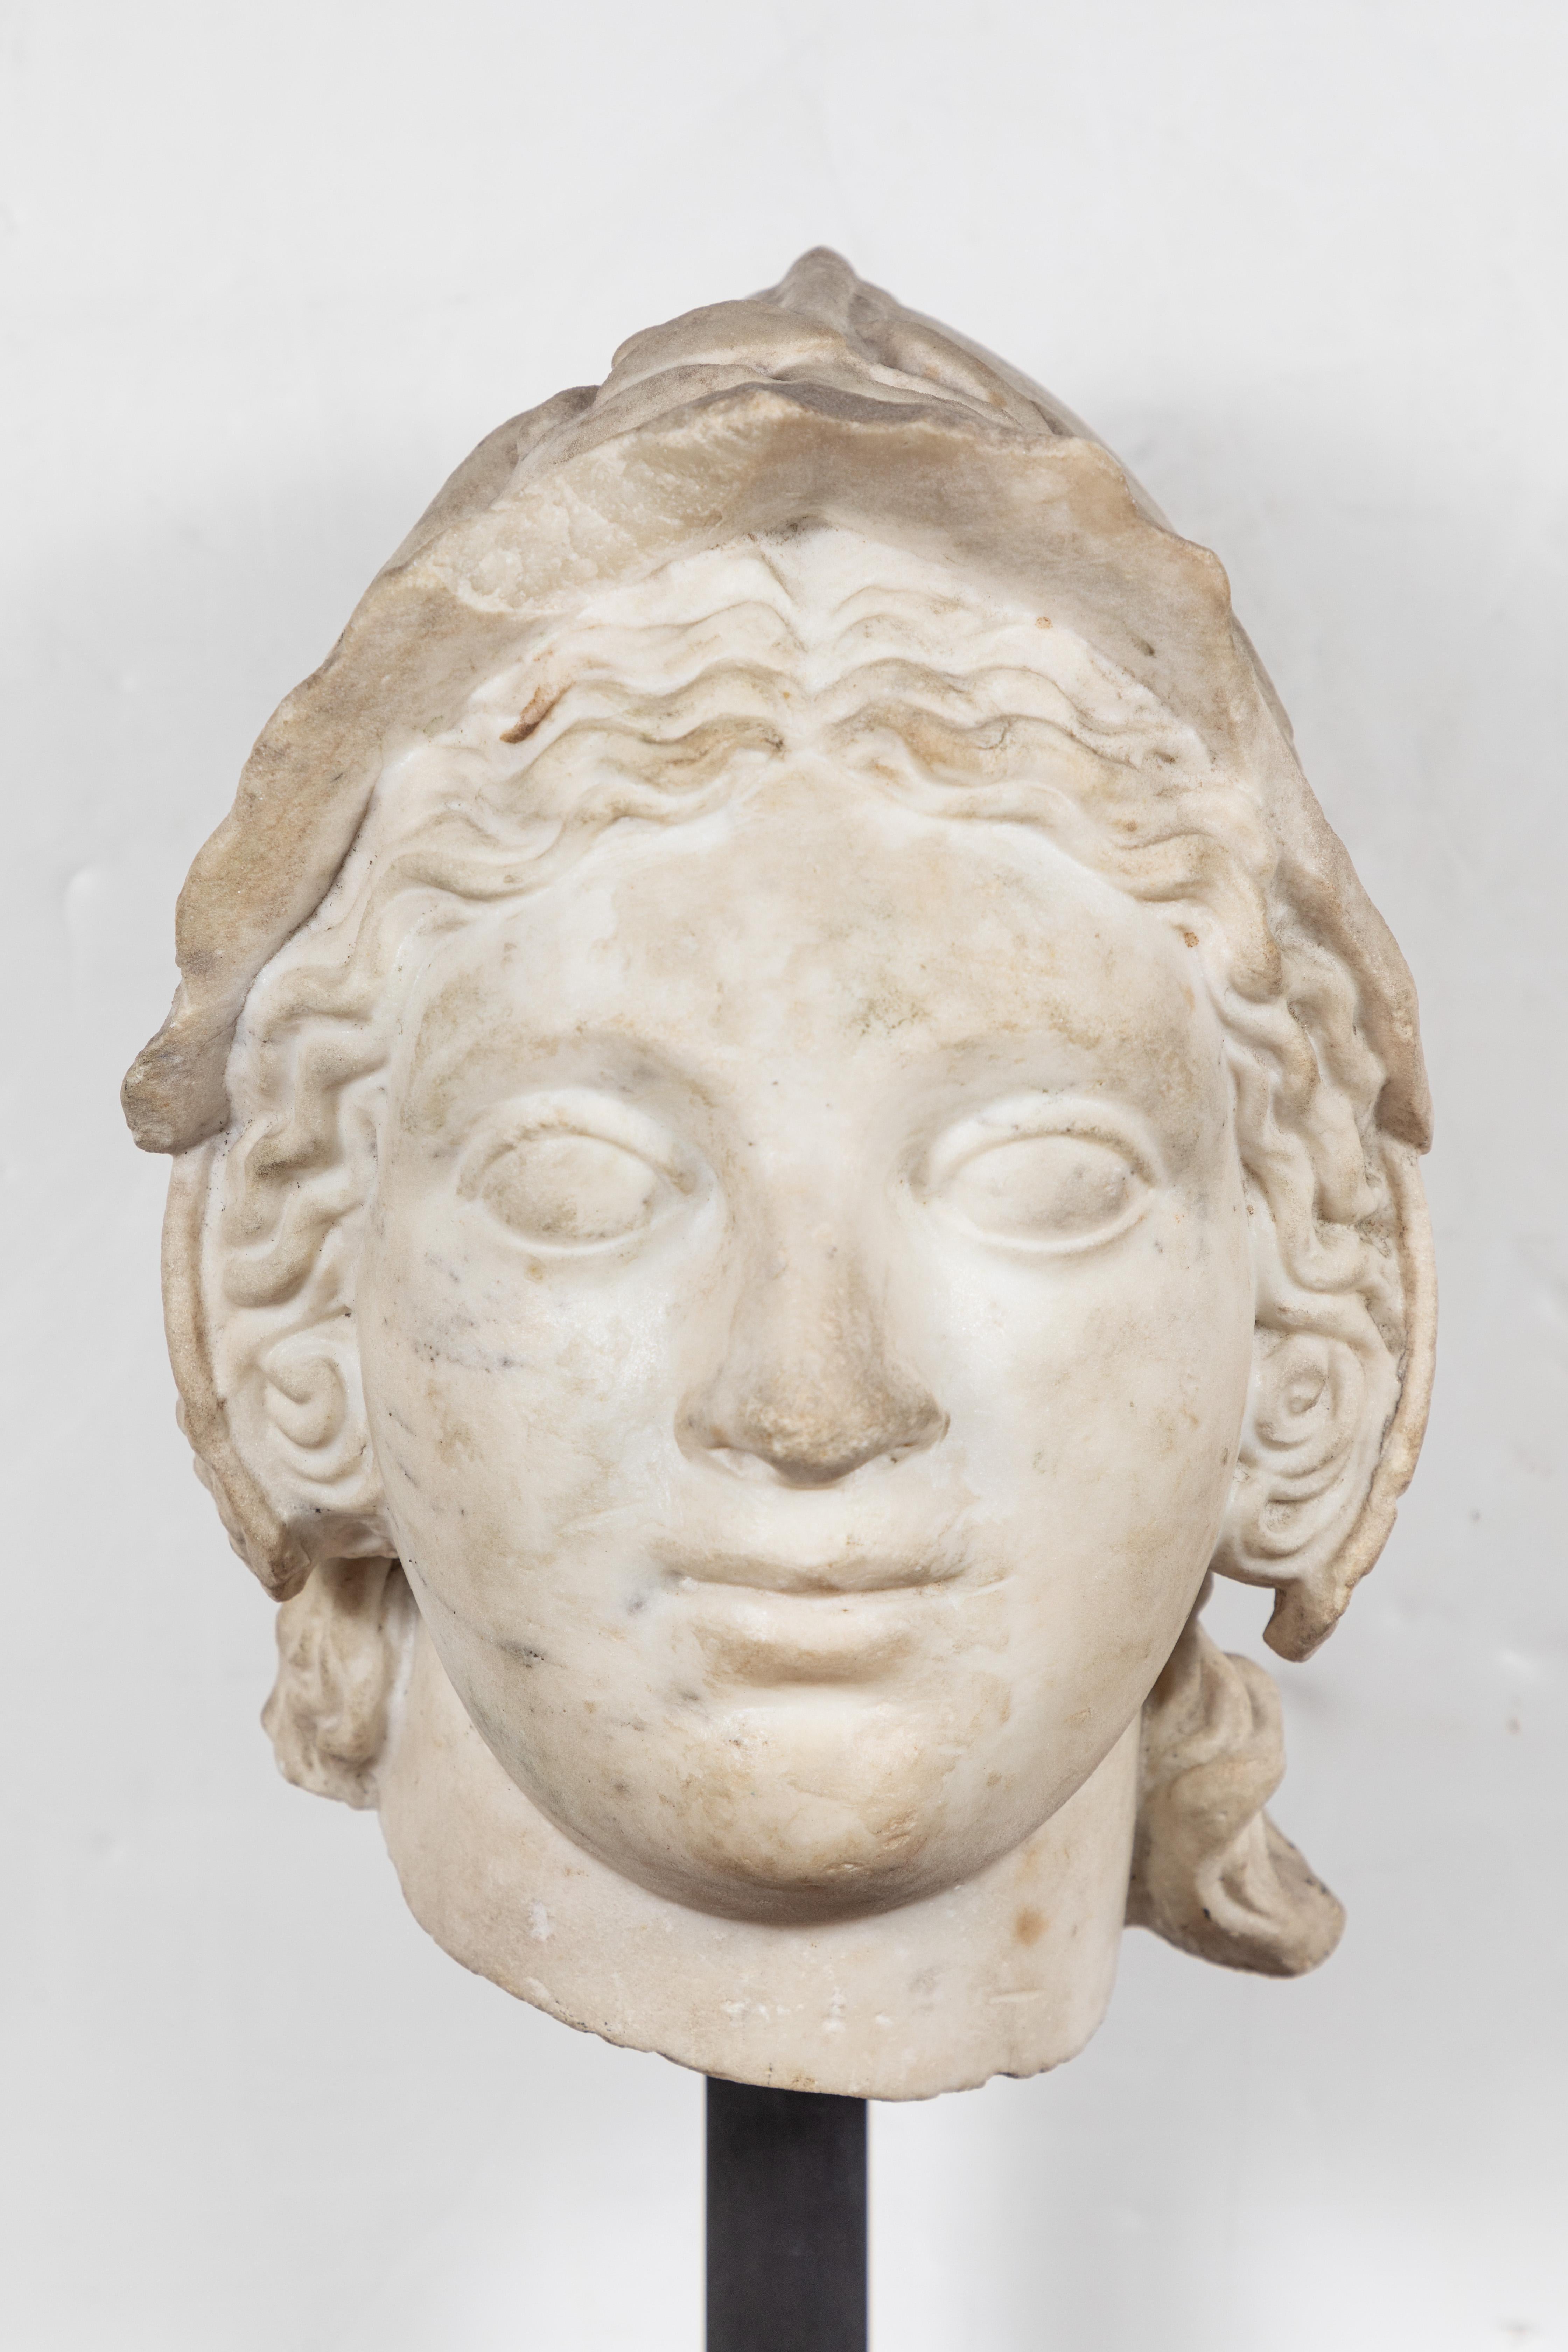 Exceptional, hand carved all the way around, 17th century, Carrara marble bust of Athena in a helmet surrounded by a laurel wreath. Fabulous expression, and beautifully carved. Mounted on a beautiful, later, tiered stone base.

Dimensions of bust